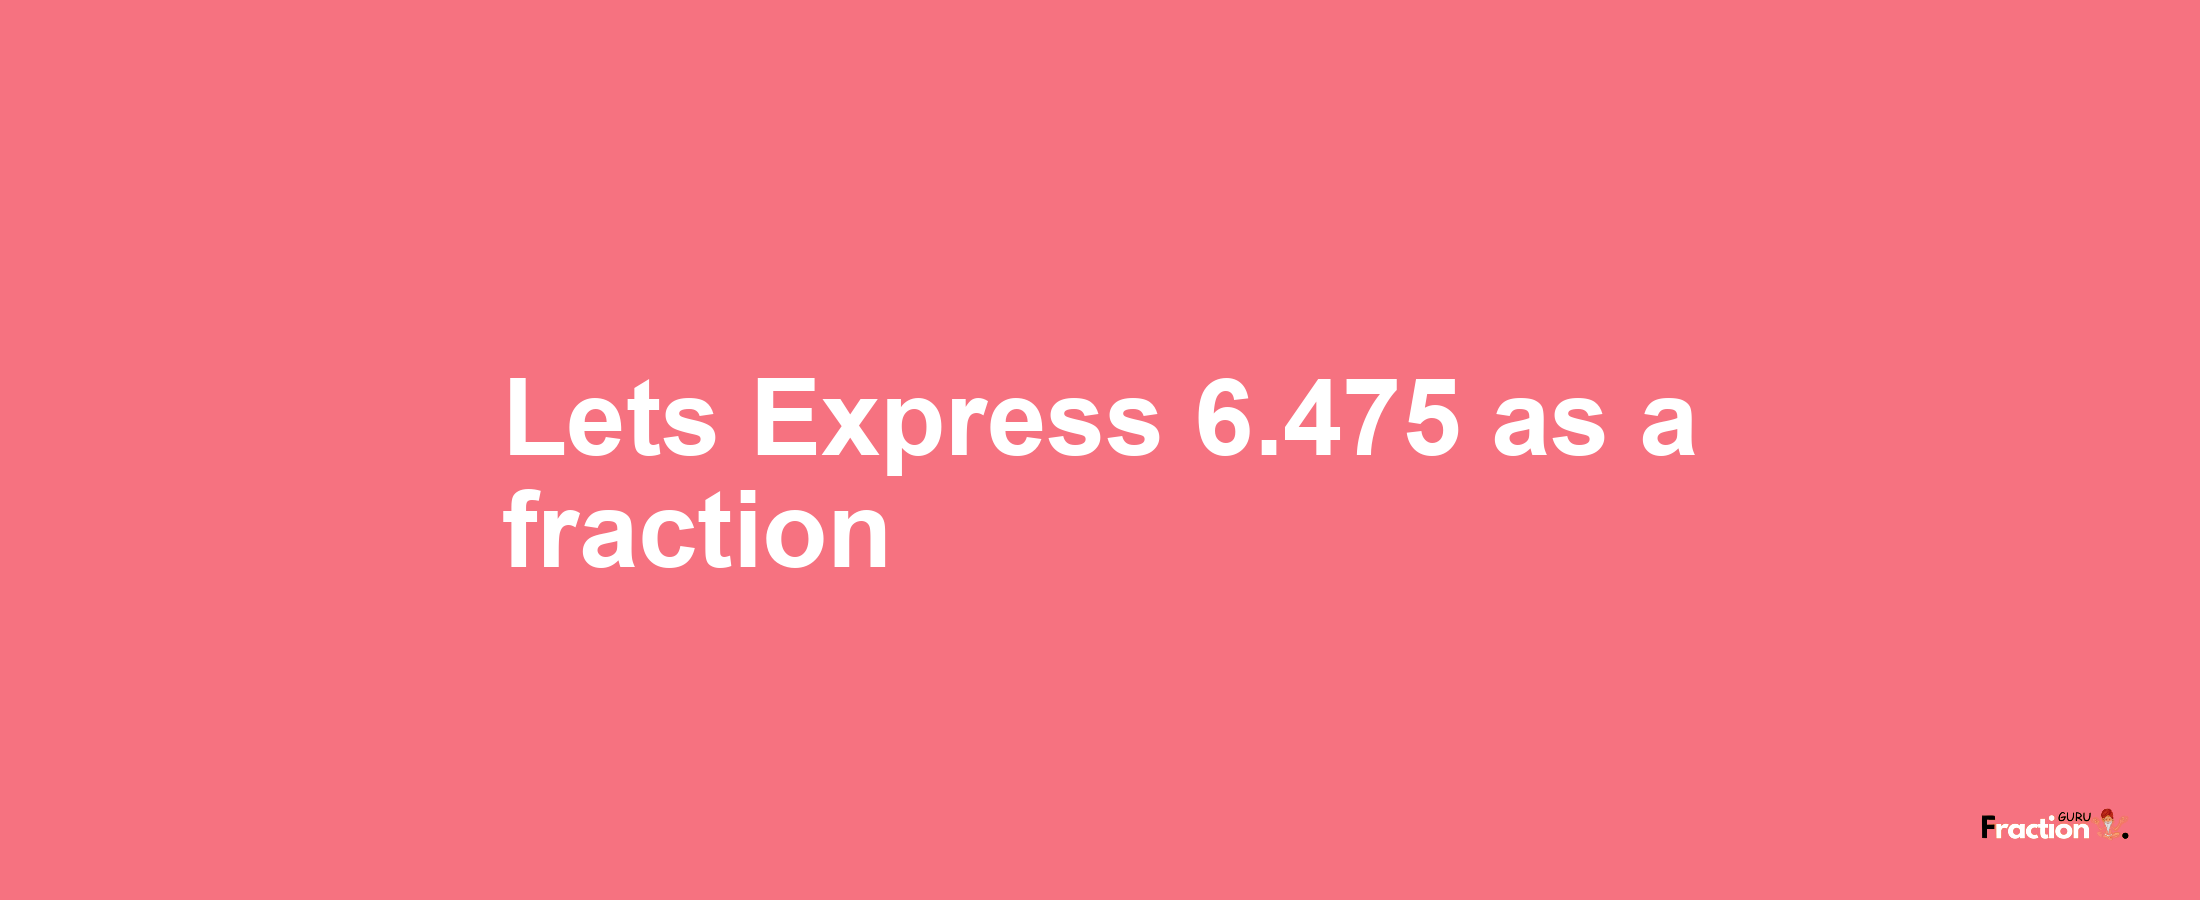 Lets Express 6.475 as afraction